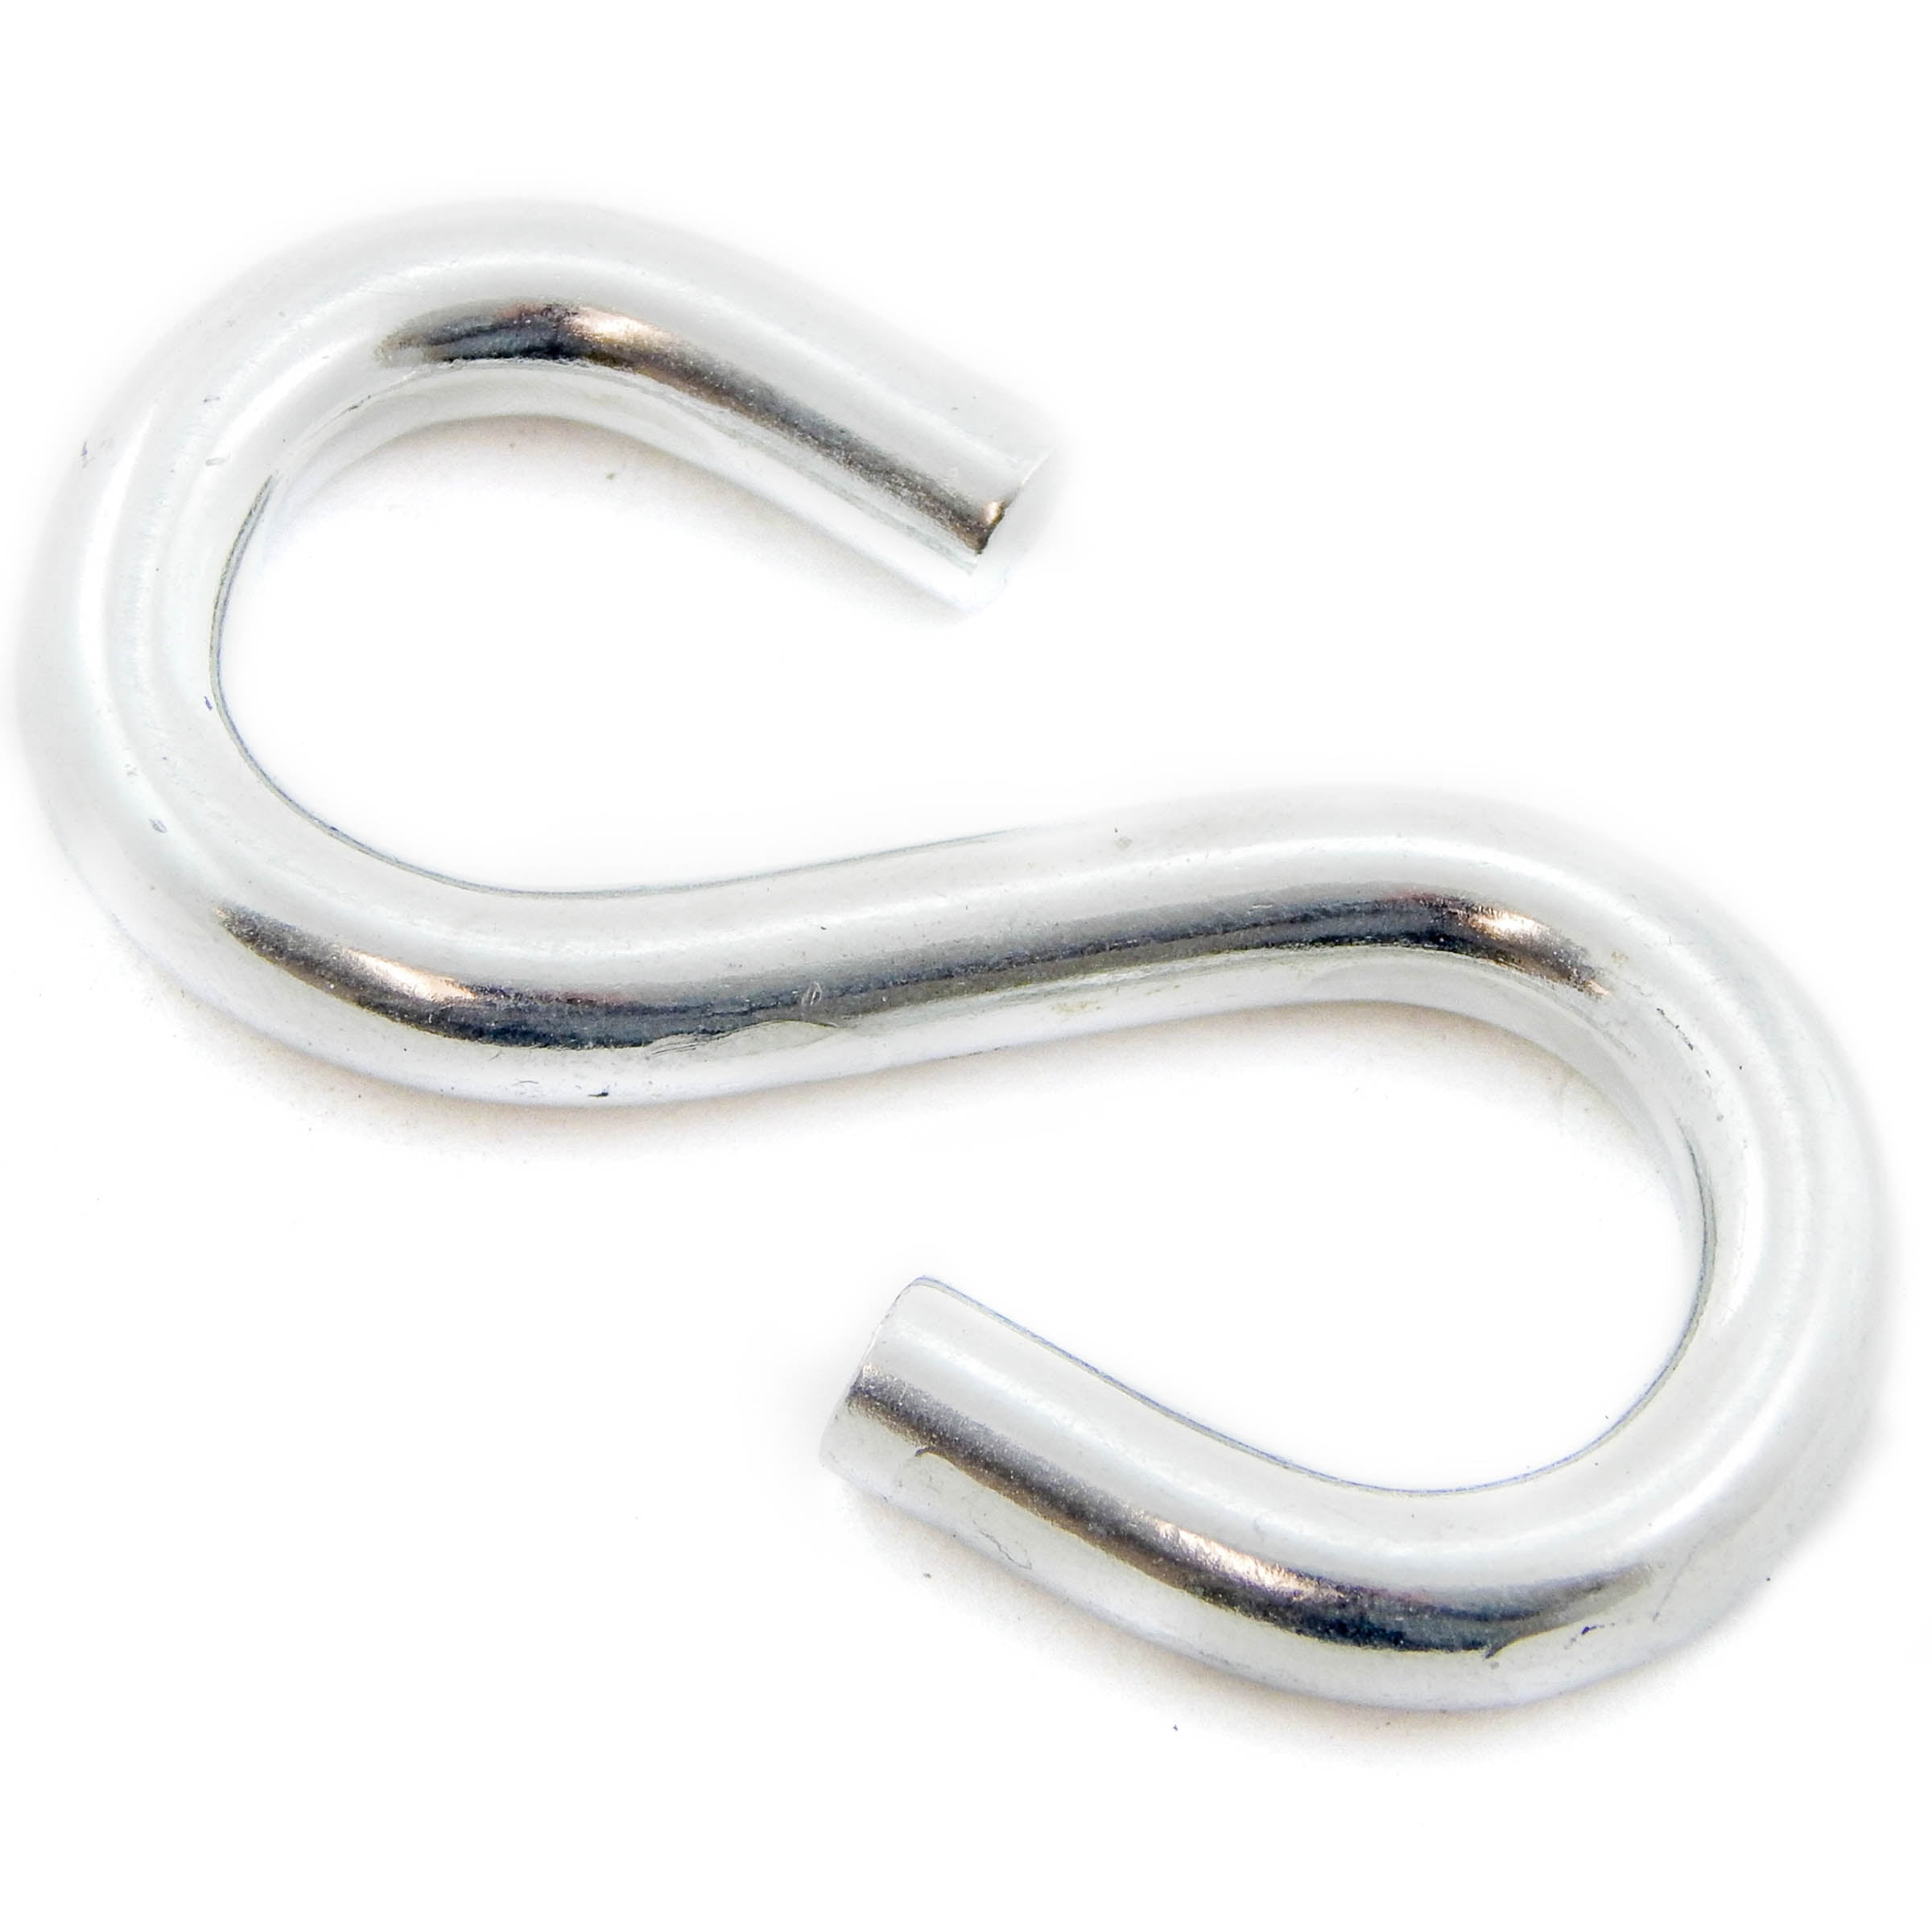 25 HEAVY DUTY STAINLESS STEEL SMALL UTILITY S HOOKS 4" X 4MM TEST 120 LBS 